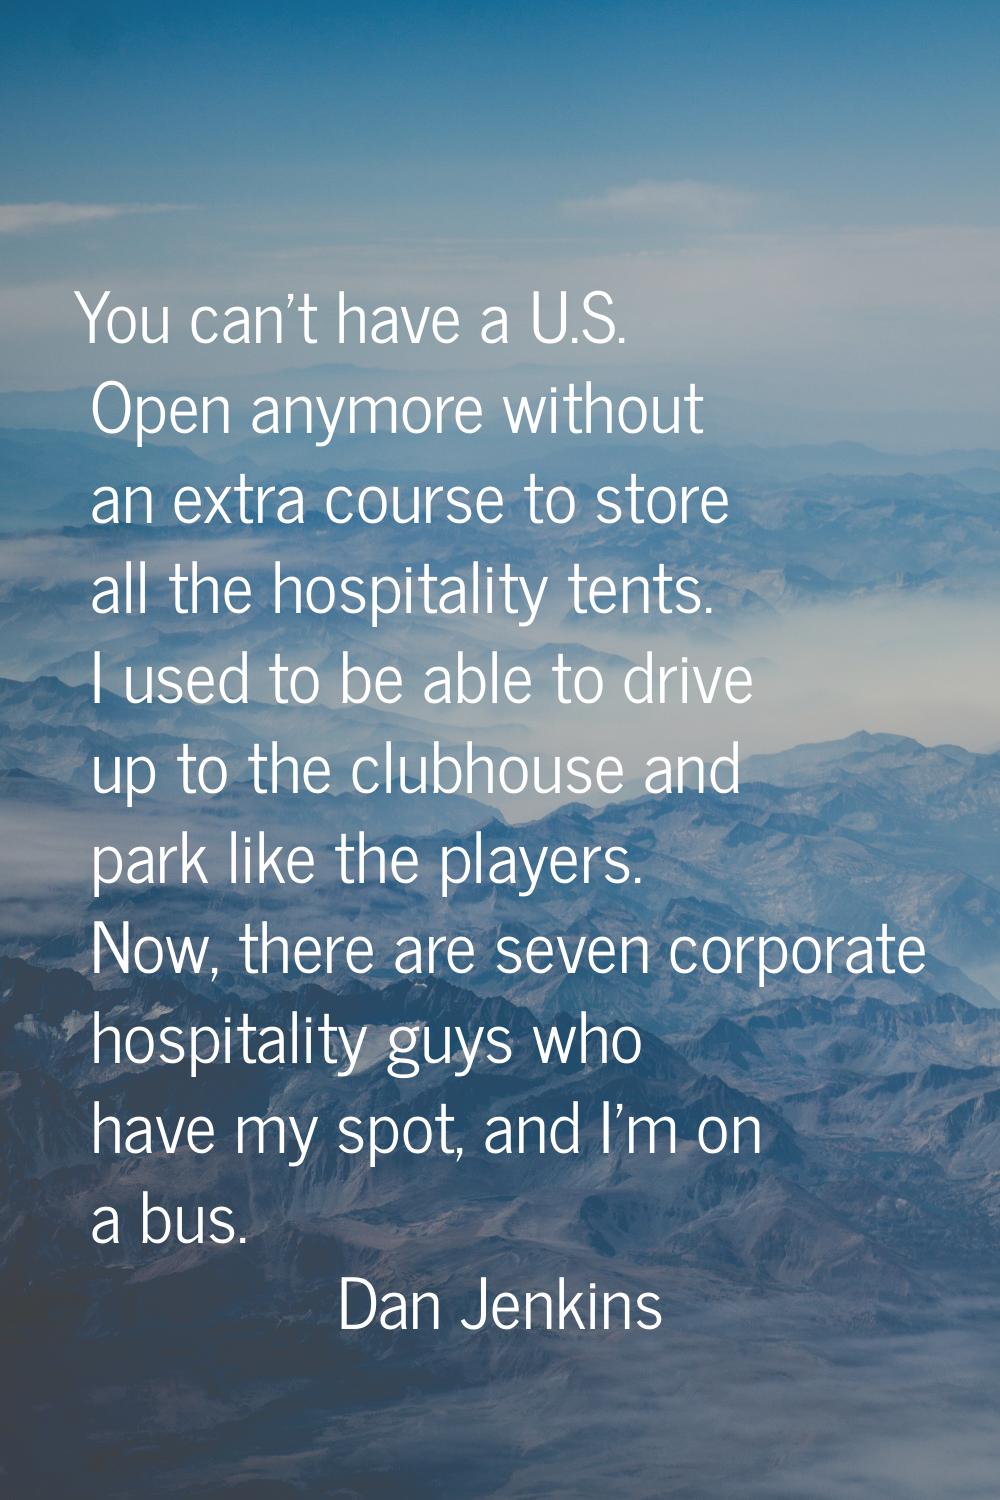 You can't have a U.S. Open anymore without an extra course to store all the hospitality tents. I us